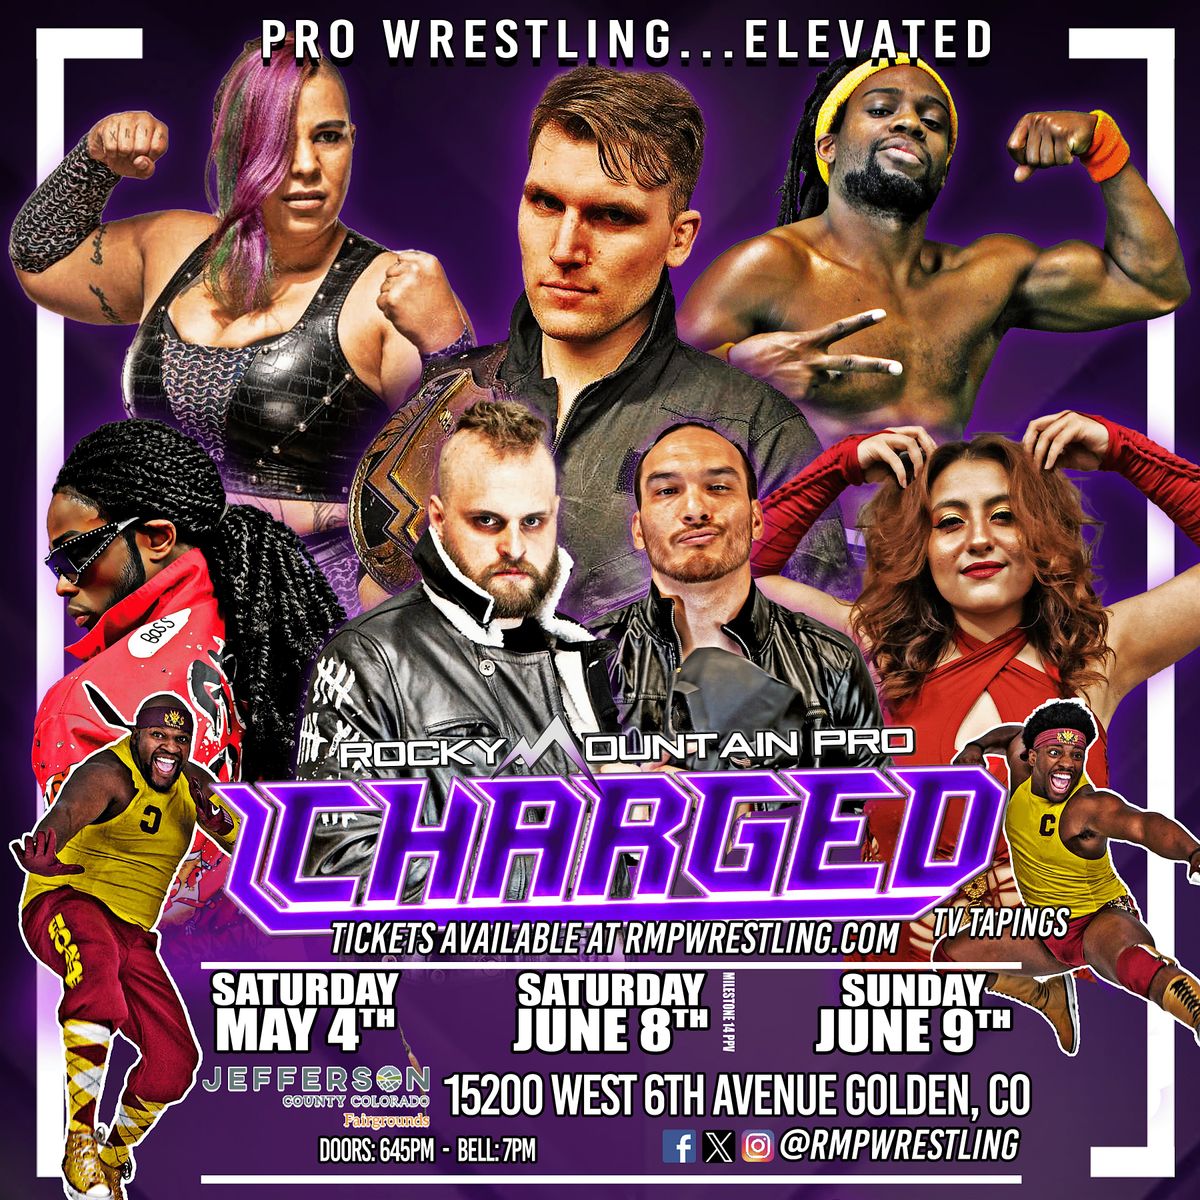 Rocky Mountain Pro "Charged" TV Taping - Pro Wrestling...ELEVATED!